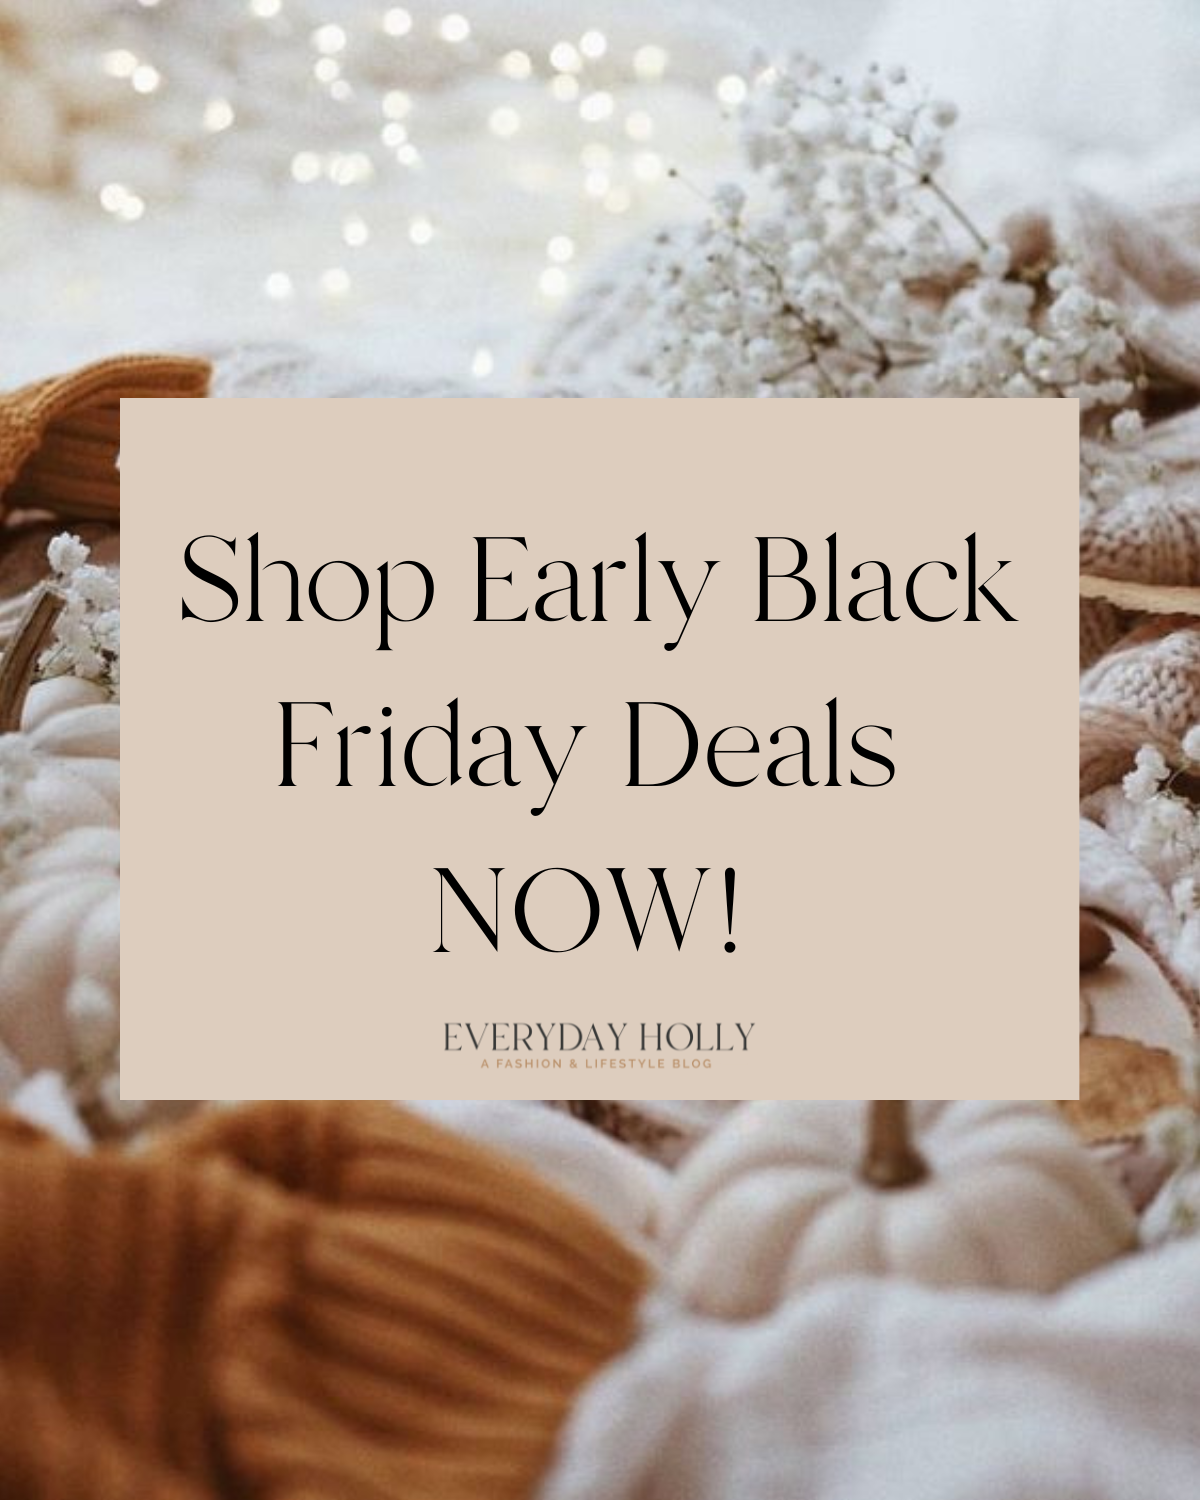 shop early black friday deals now | #shop #early #blackfriday #deals #now